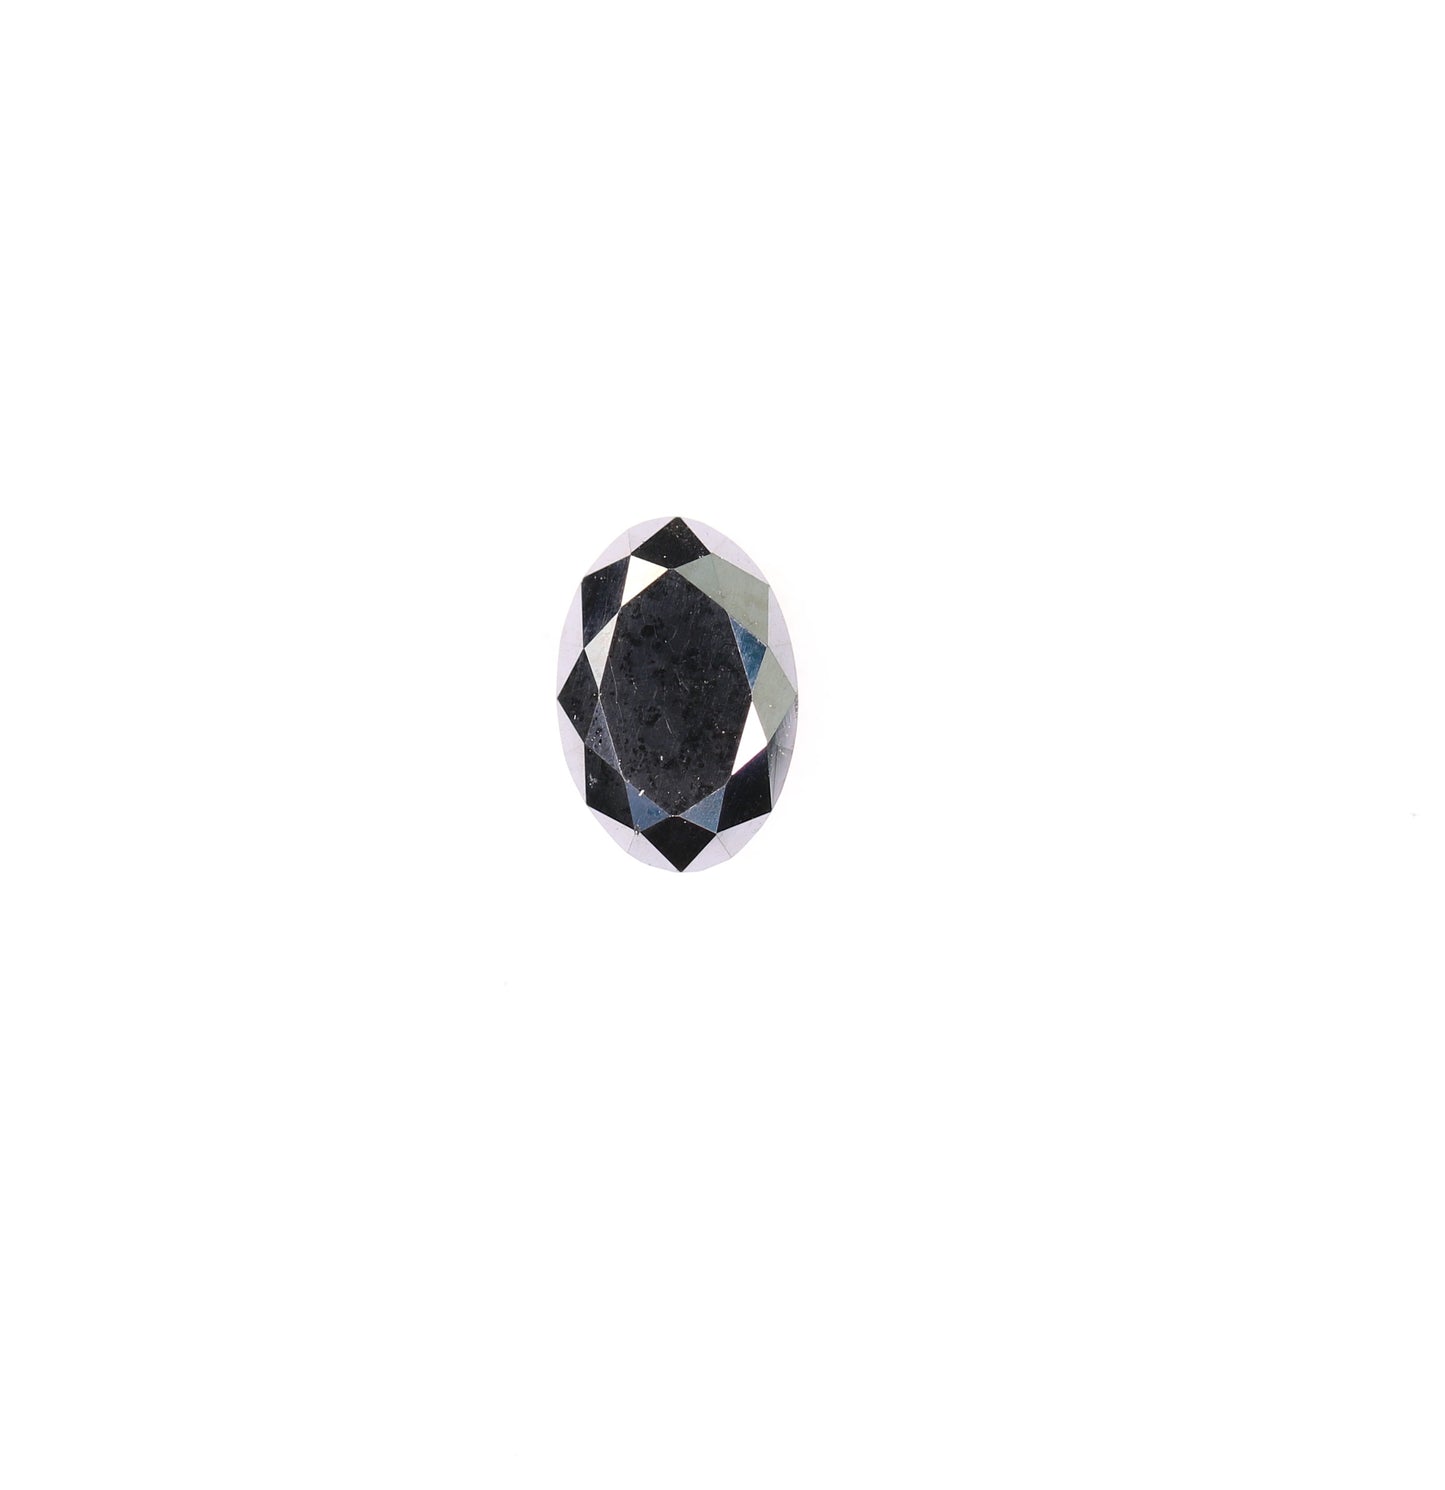 0.50 CT Oval Shape Brilliant Cut Diamond For Propose Ring